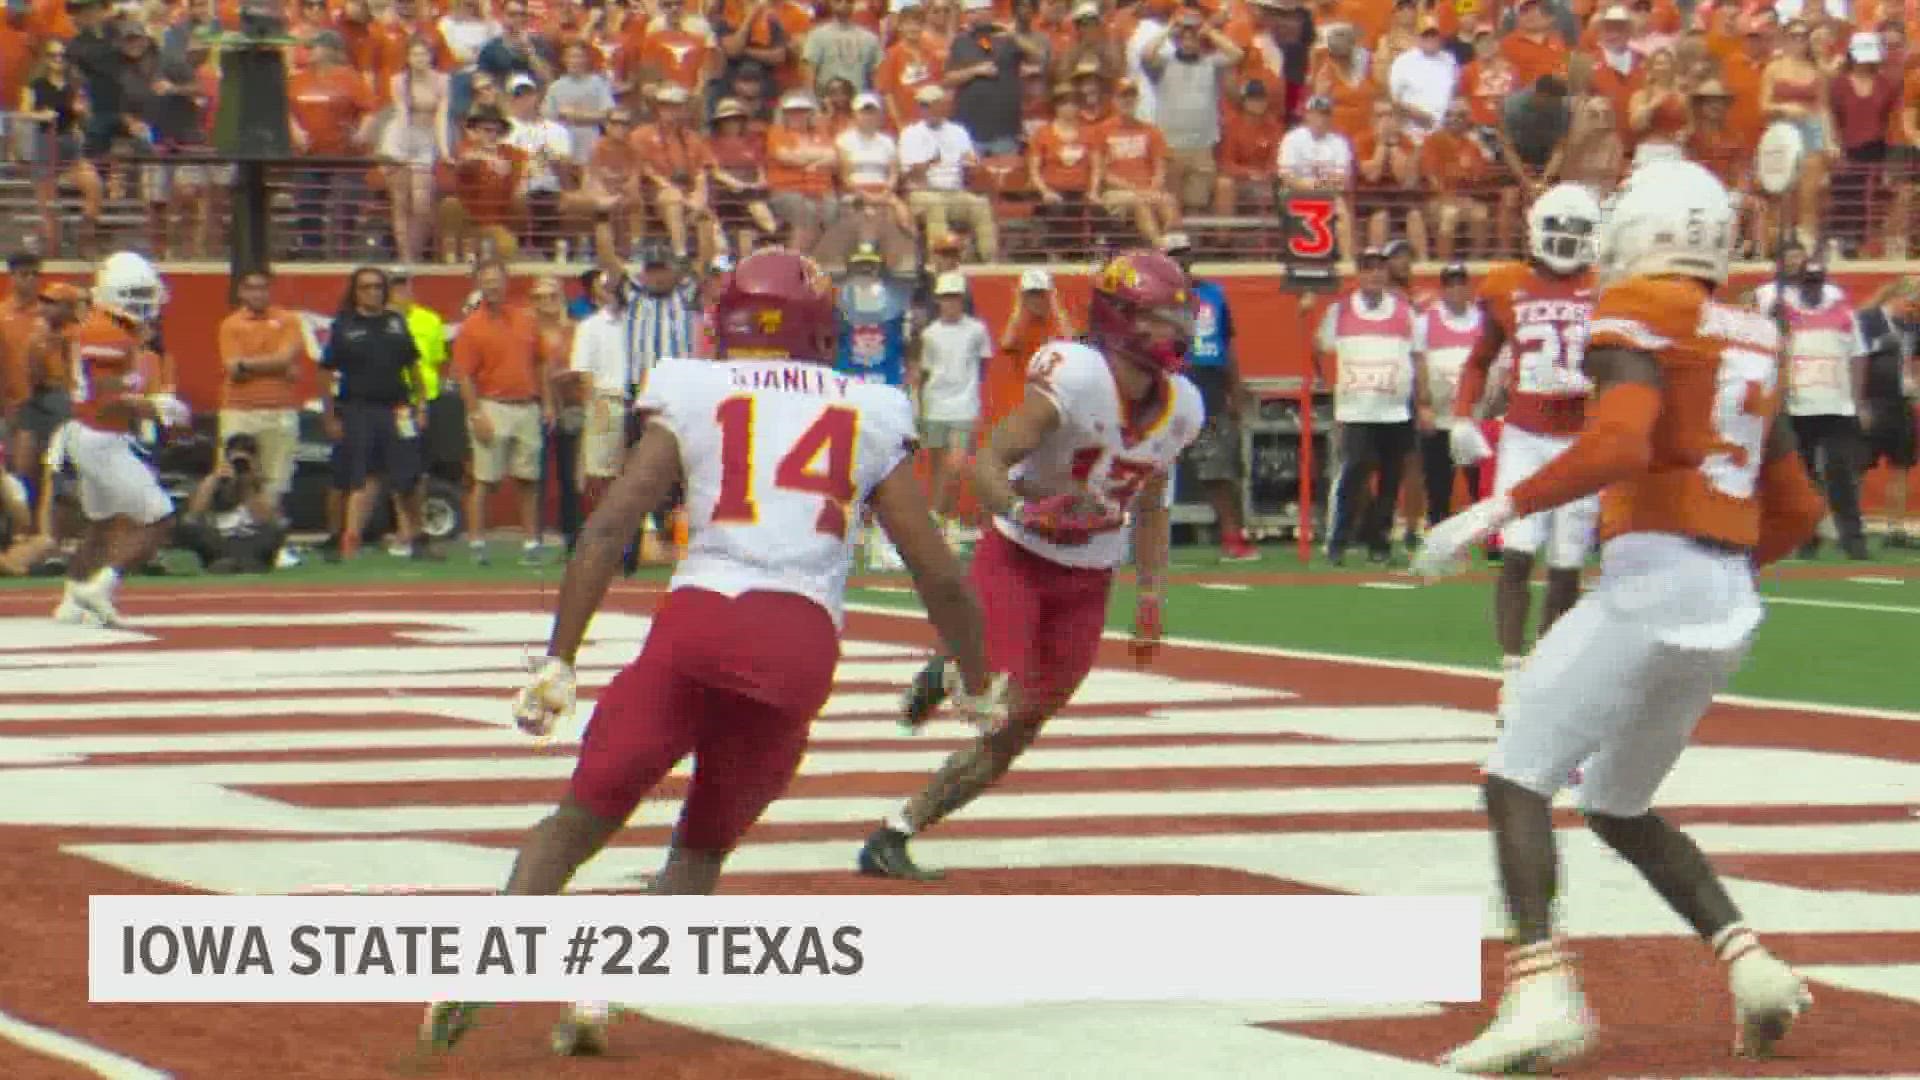 The Longhorns snapped a three-game losing streak against Iowa State. The Cyclones (3-4, 0-4) have lost four straight.